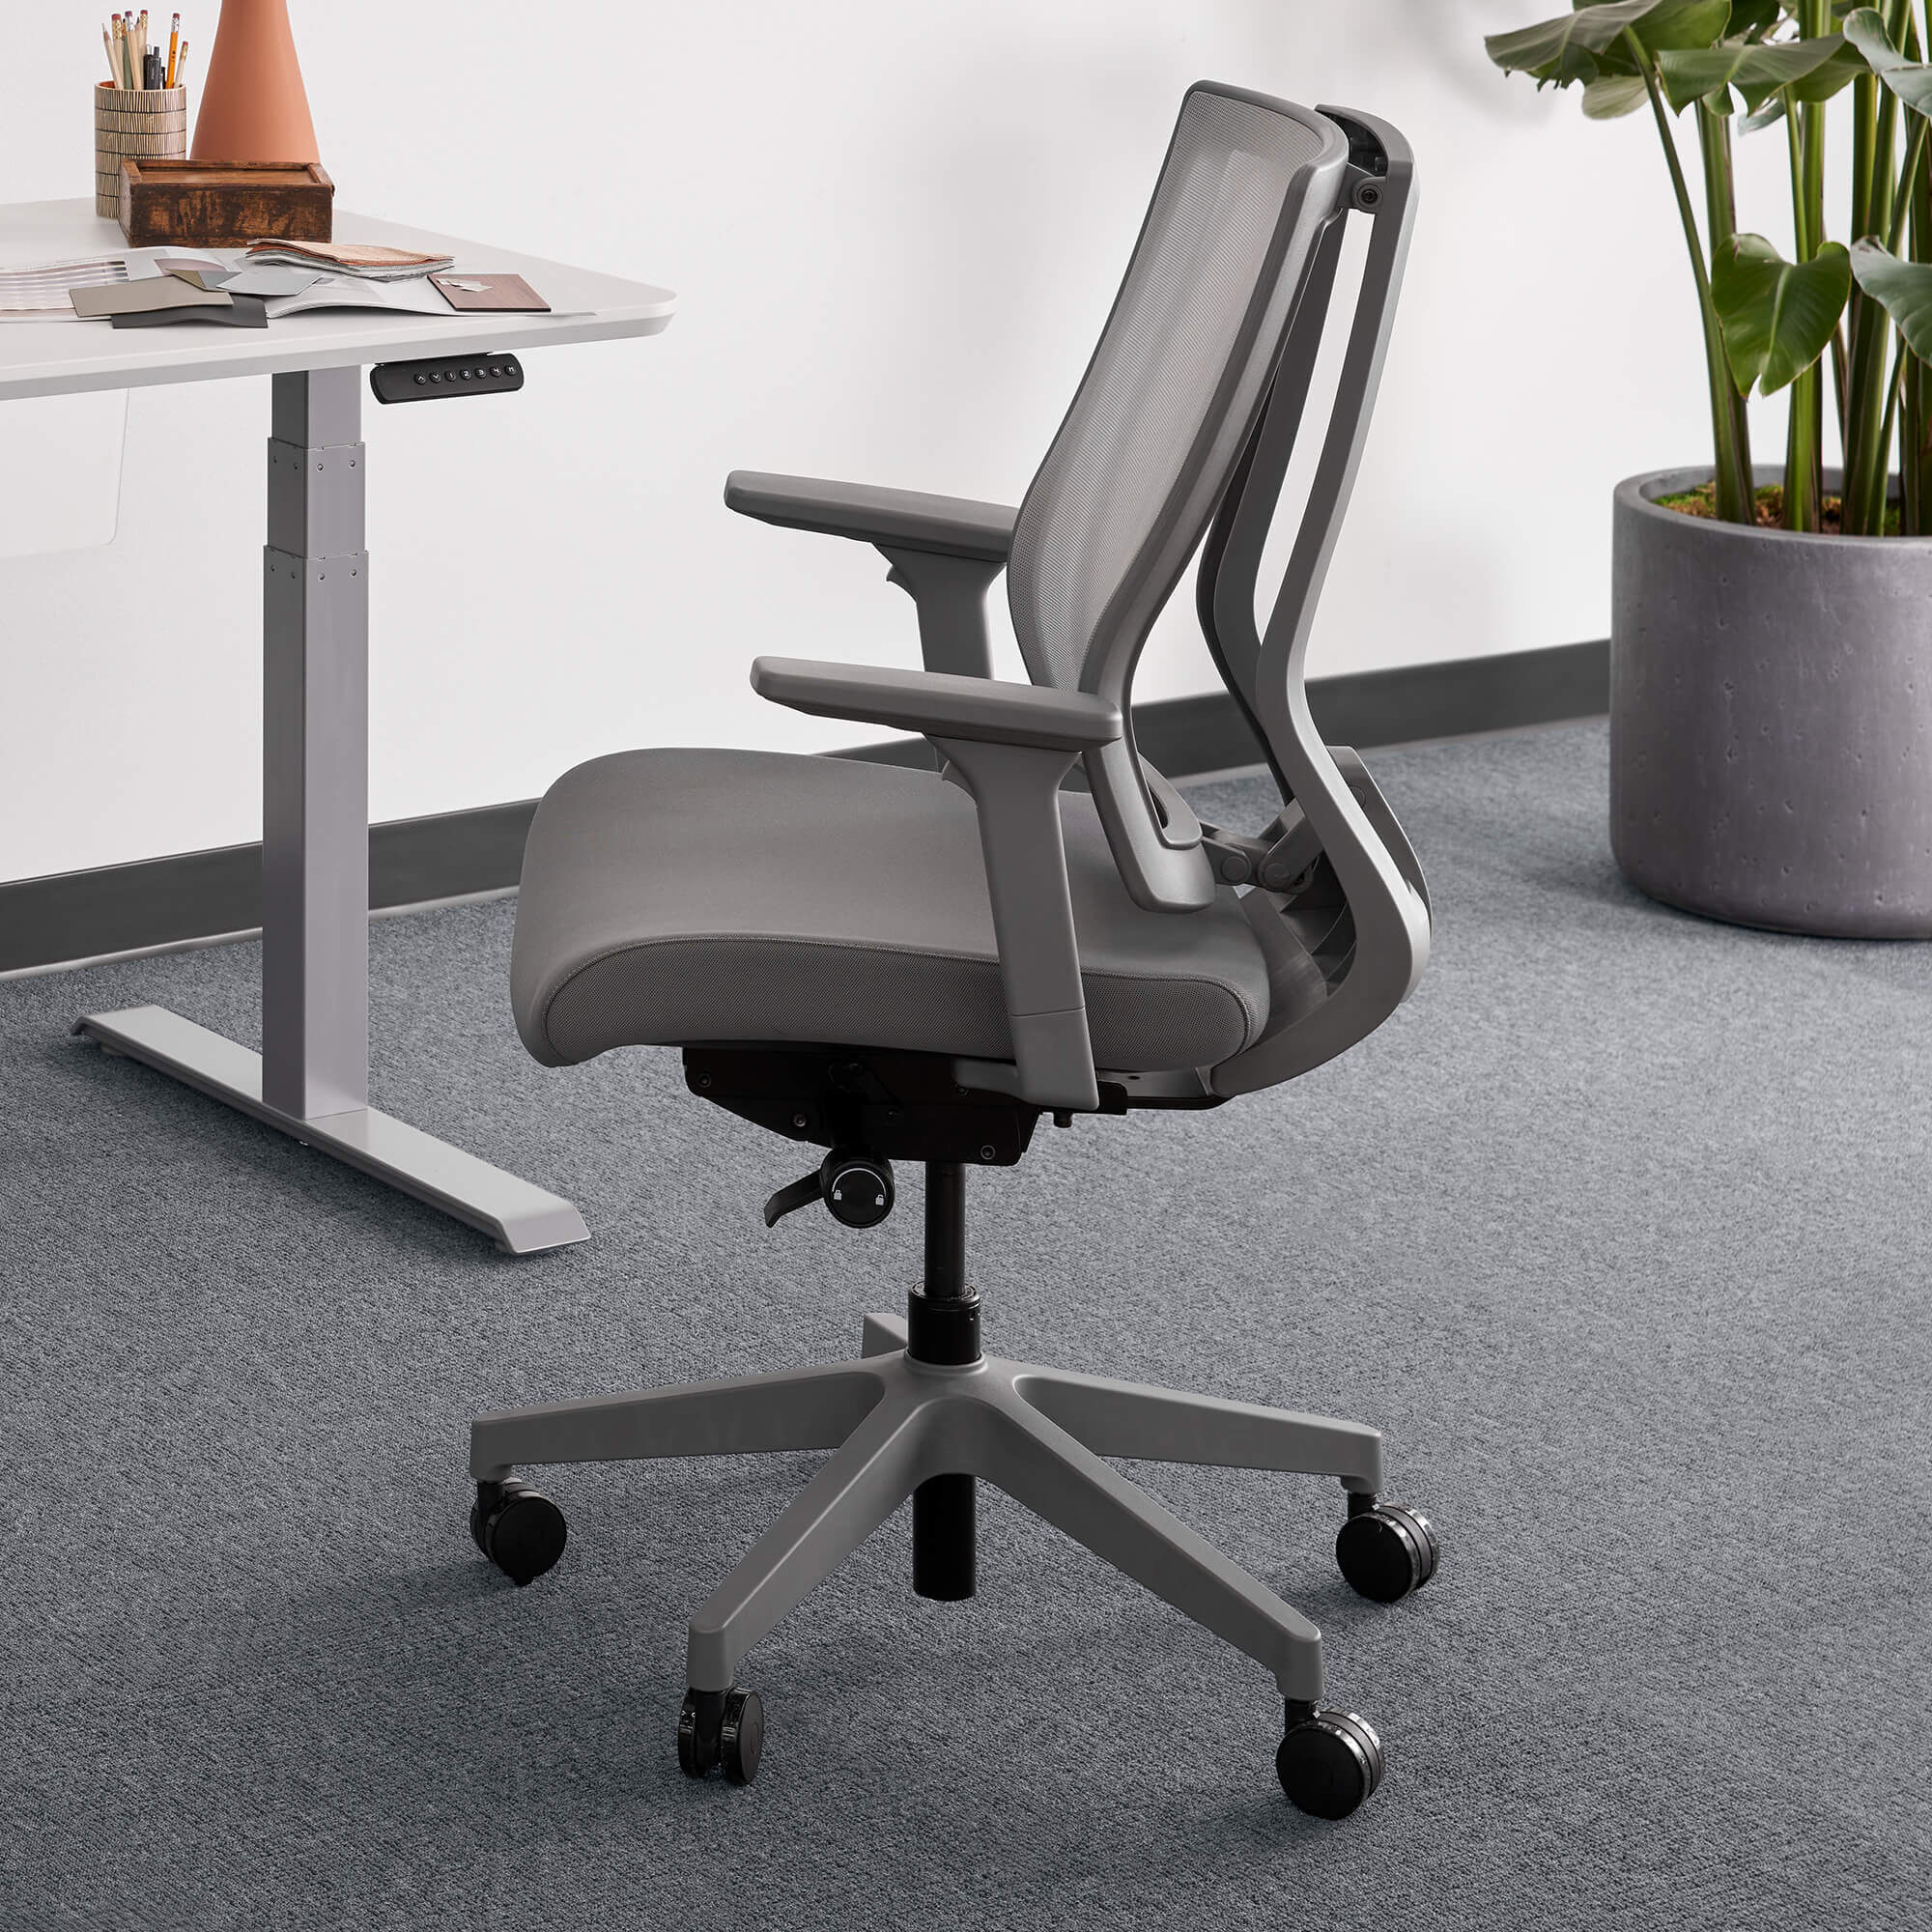 Office Chairs & Seating | Sit-Stand Office Furniture | Vari®